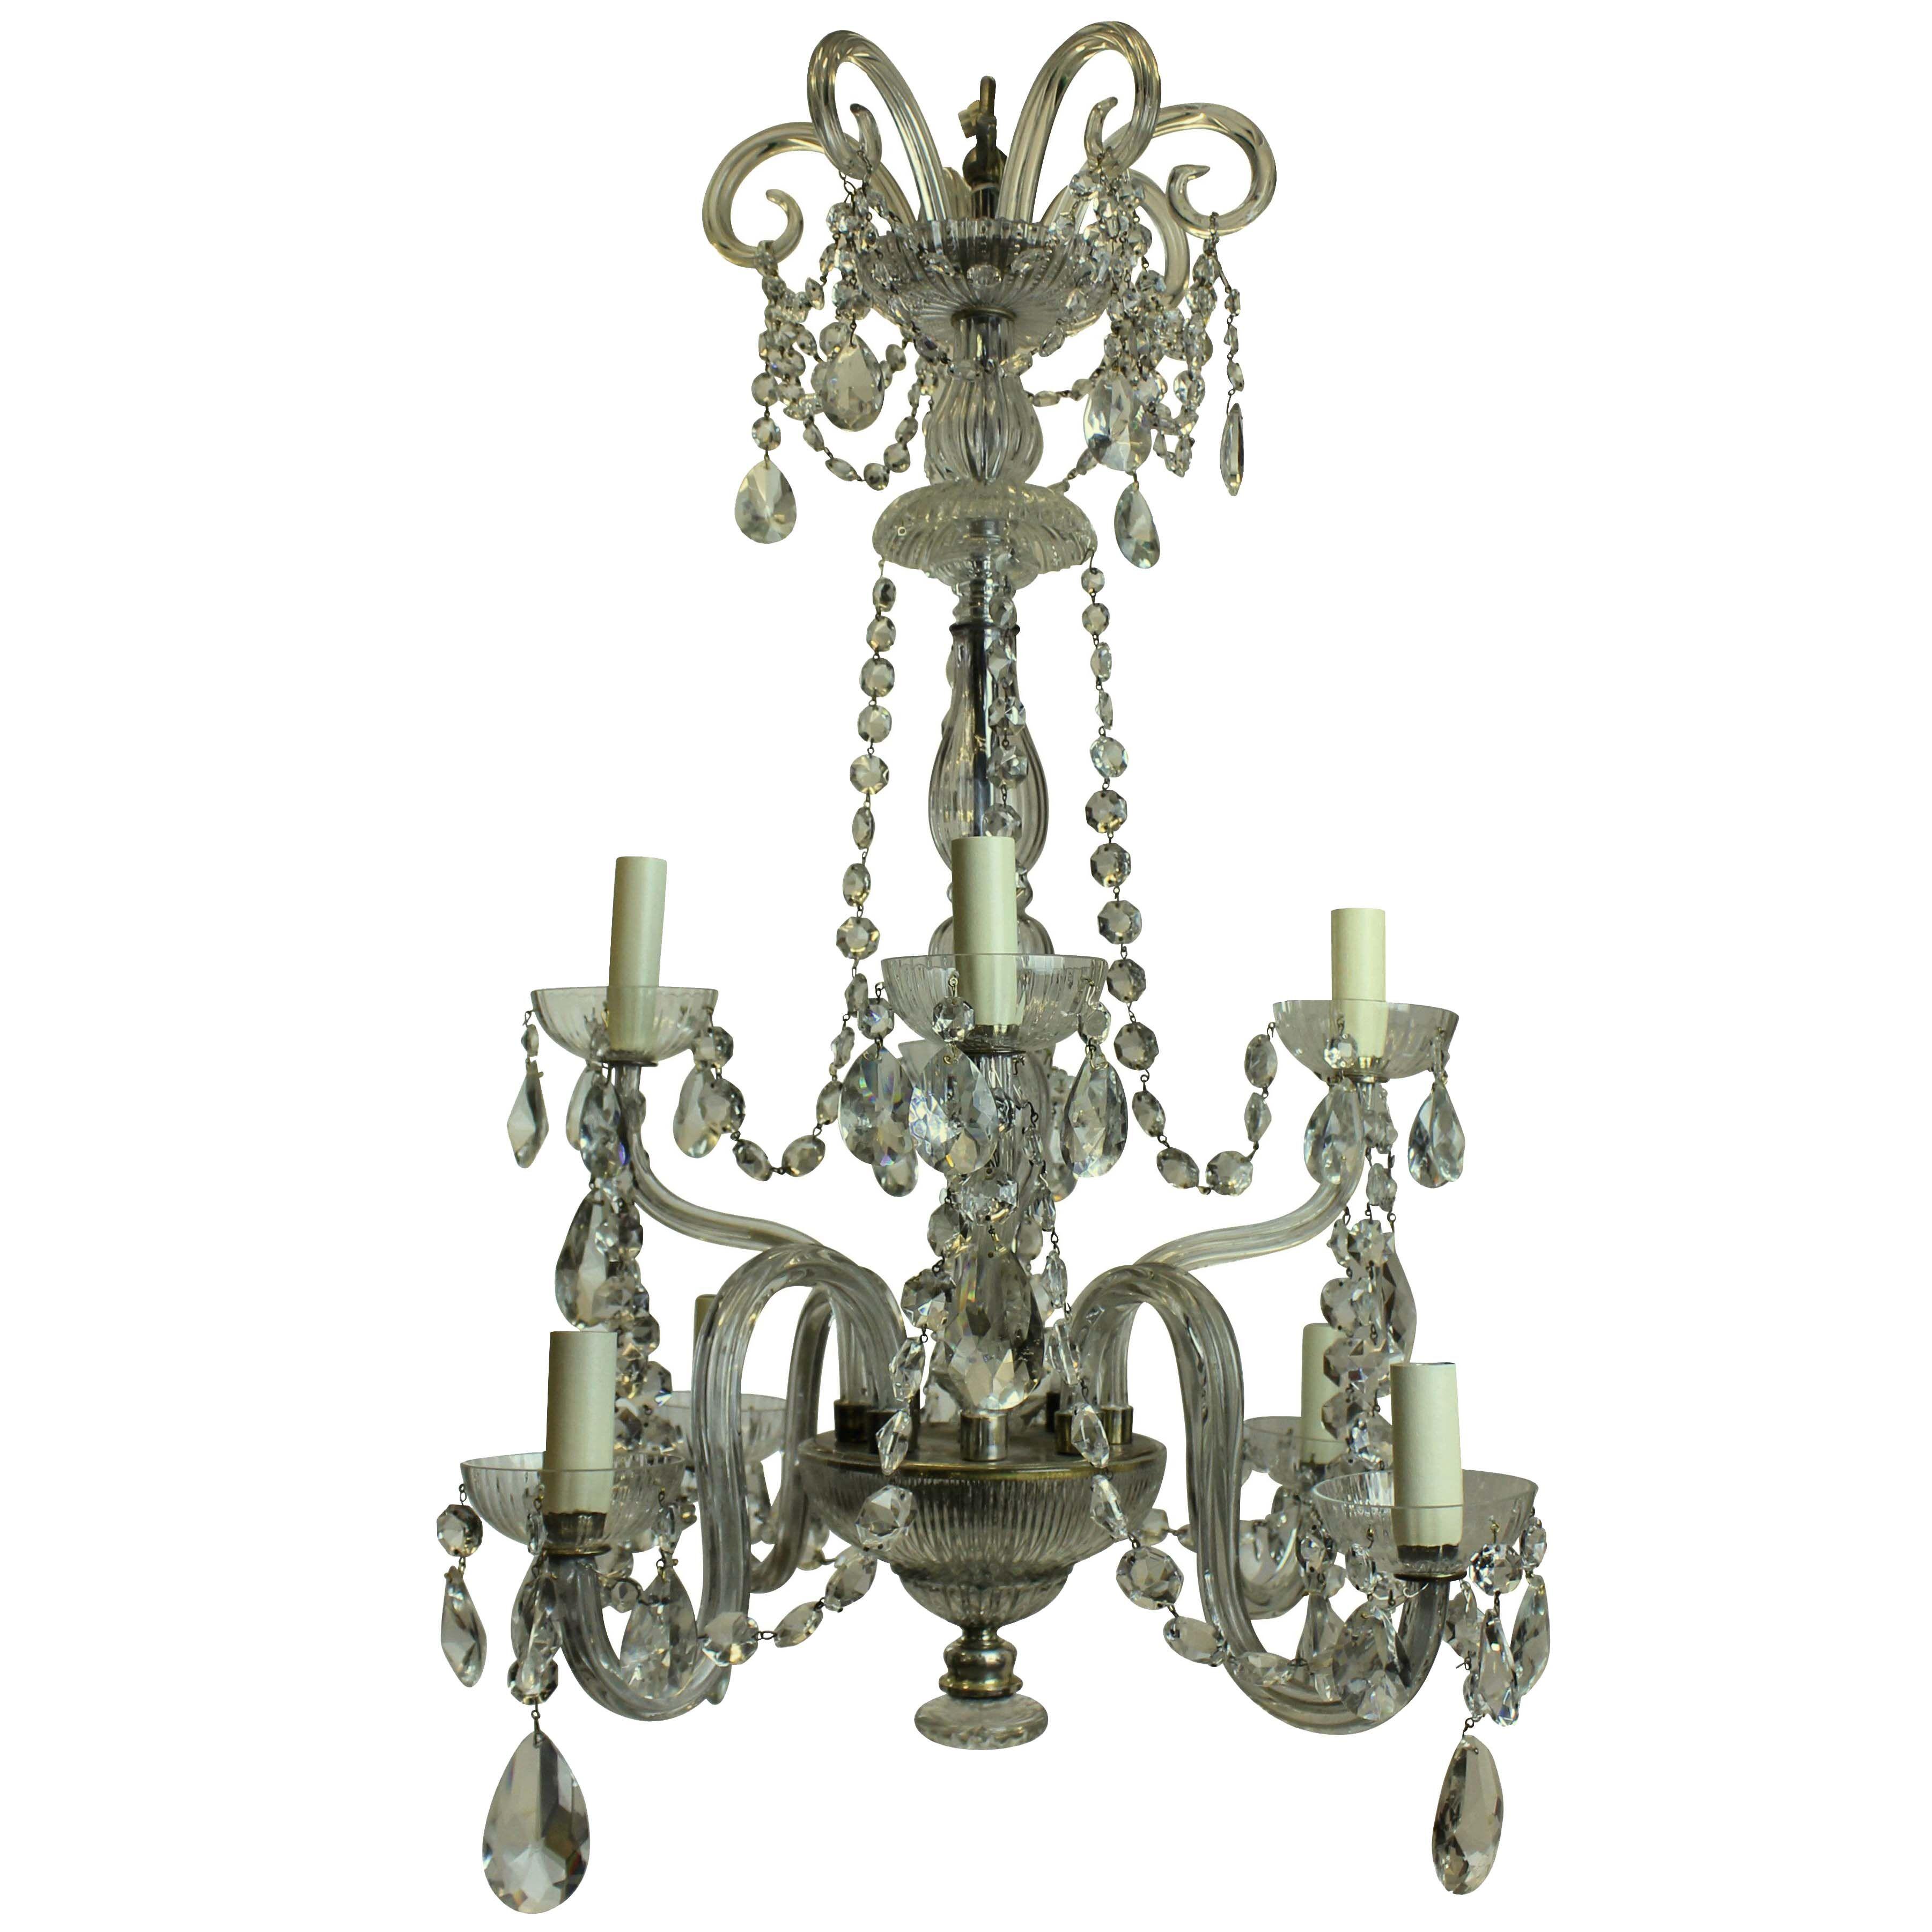 A FRENCH EIGHT ARM CUT GLASS CHANDELIER